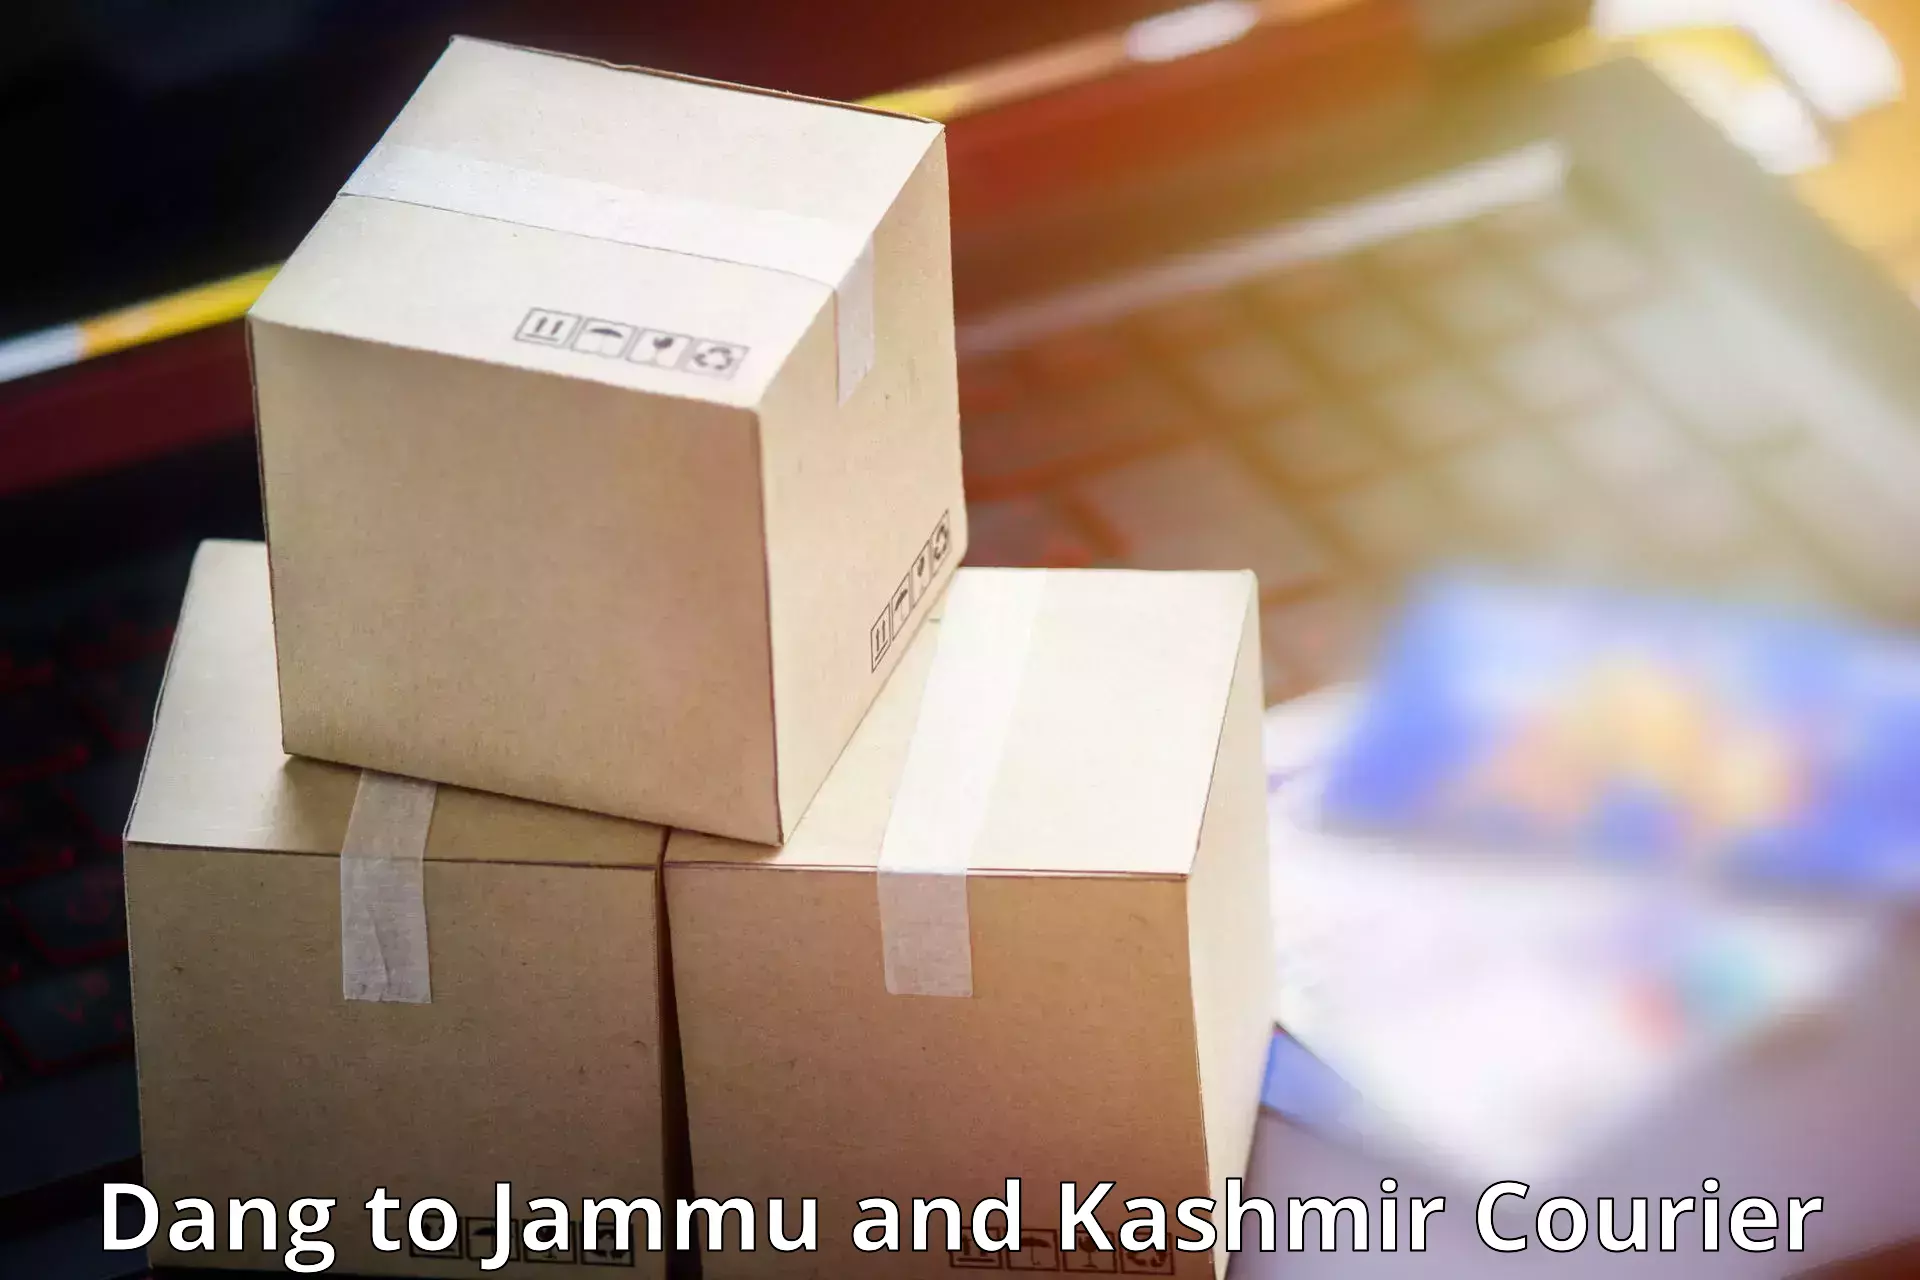 Cargo delivery service Dang to Jammu and Kashmir